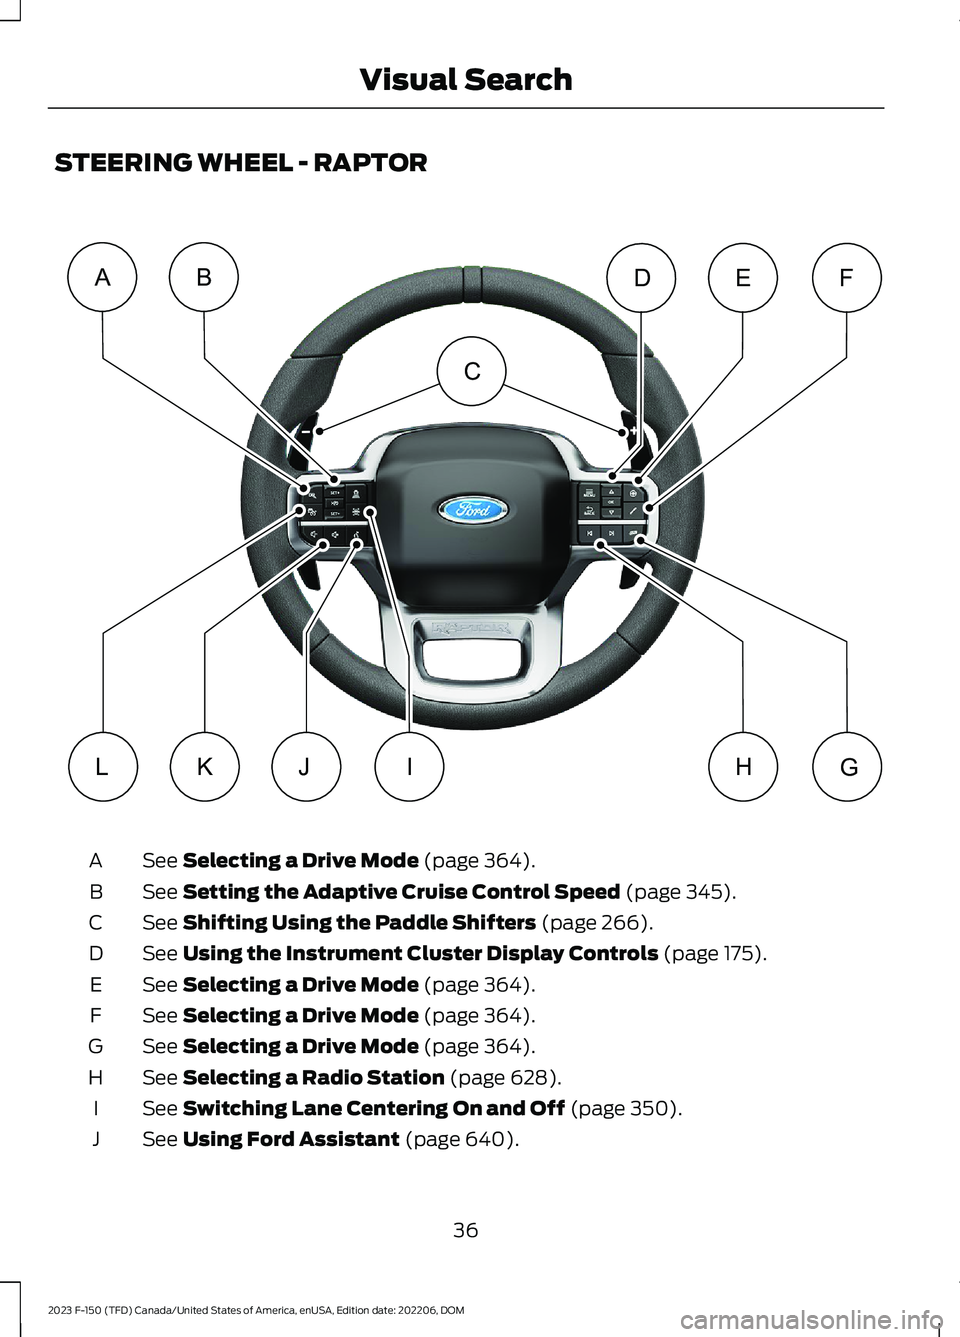 FORD F150 2023  Owners Manual STEERING WHEEL - RAPTOR
See Selecting a Drive Mode (page 364).A
See Setting the Adaptive Cruise Control Speed (page 345).B
See Shifting Using the Paddle Shifters (page 266).C
See Using the Instrument 